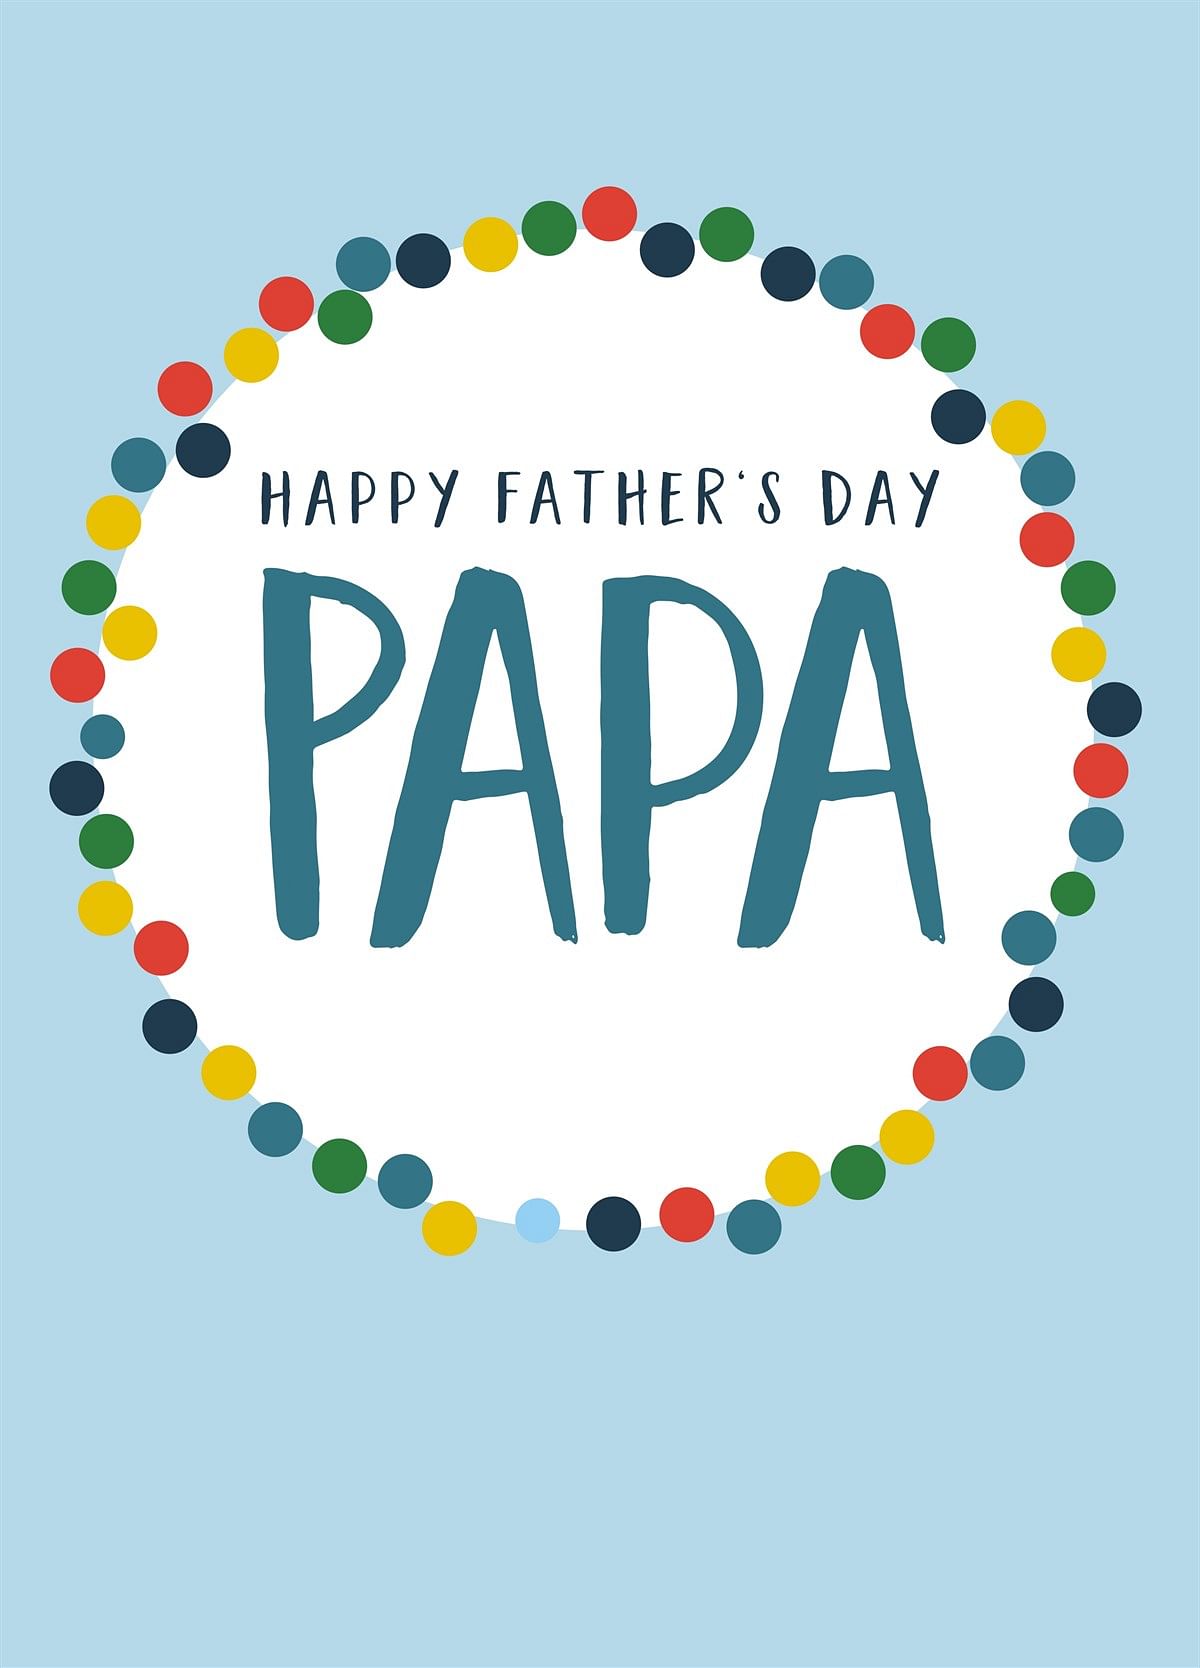 Here are some great quotes and images that you an share with your loved ones on Father’s Day 2020.